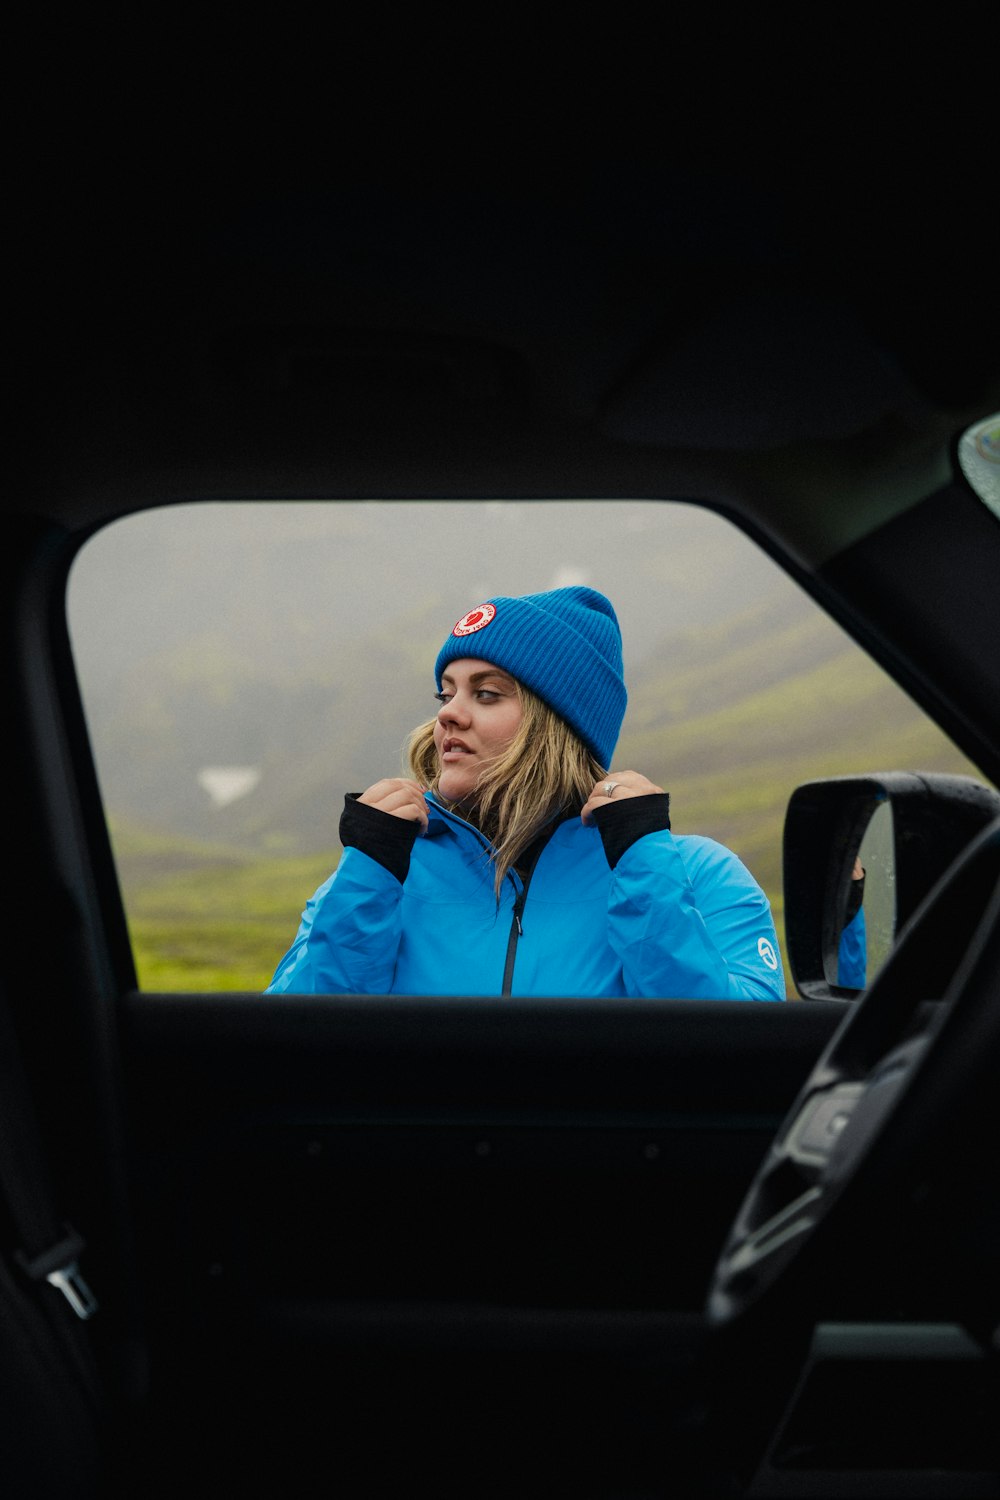 a woman in a blue jacket talking on a cell phone